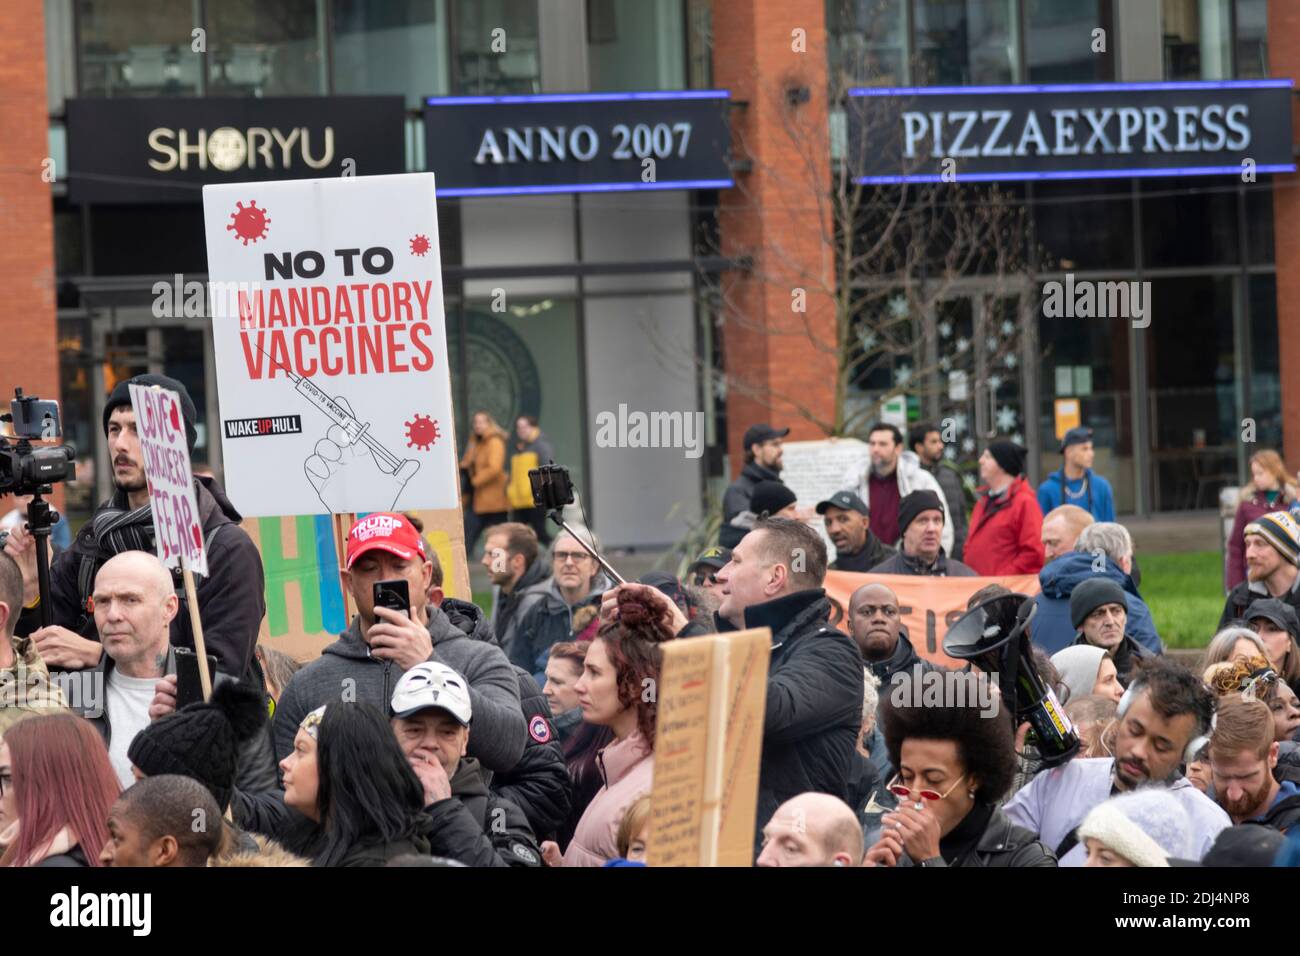 Manchester, UK. 12/12/2020:Around 1,000+ people gathered in Piccadilly, Manchester to protest against loss of freedoms due to governments reaction to corona virus Stock Photo